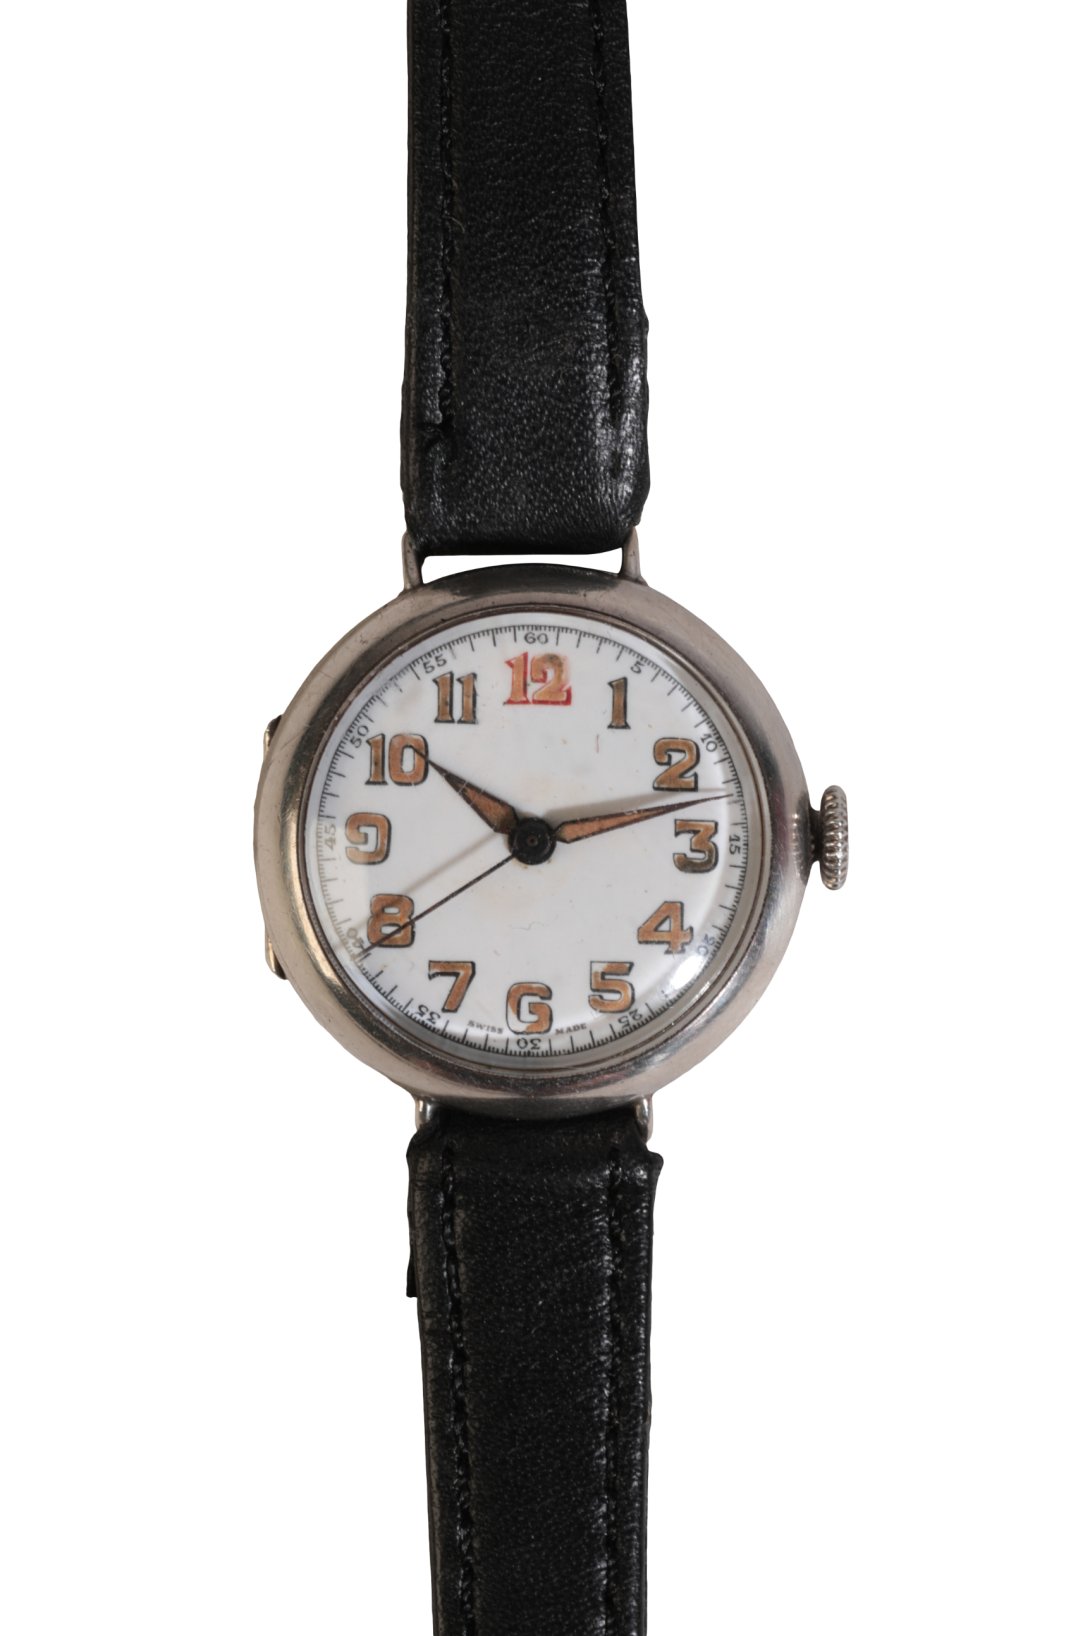 A LADY'S SILVER AIR MINISTRY WRISTWATCH - Image 2 of 2